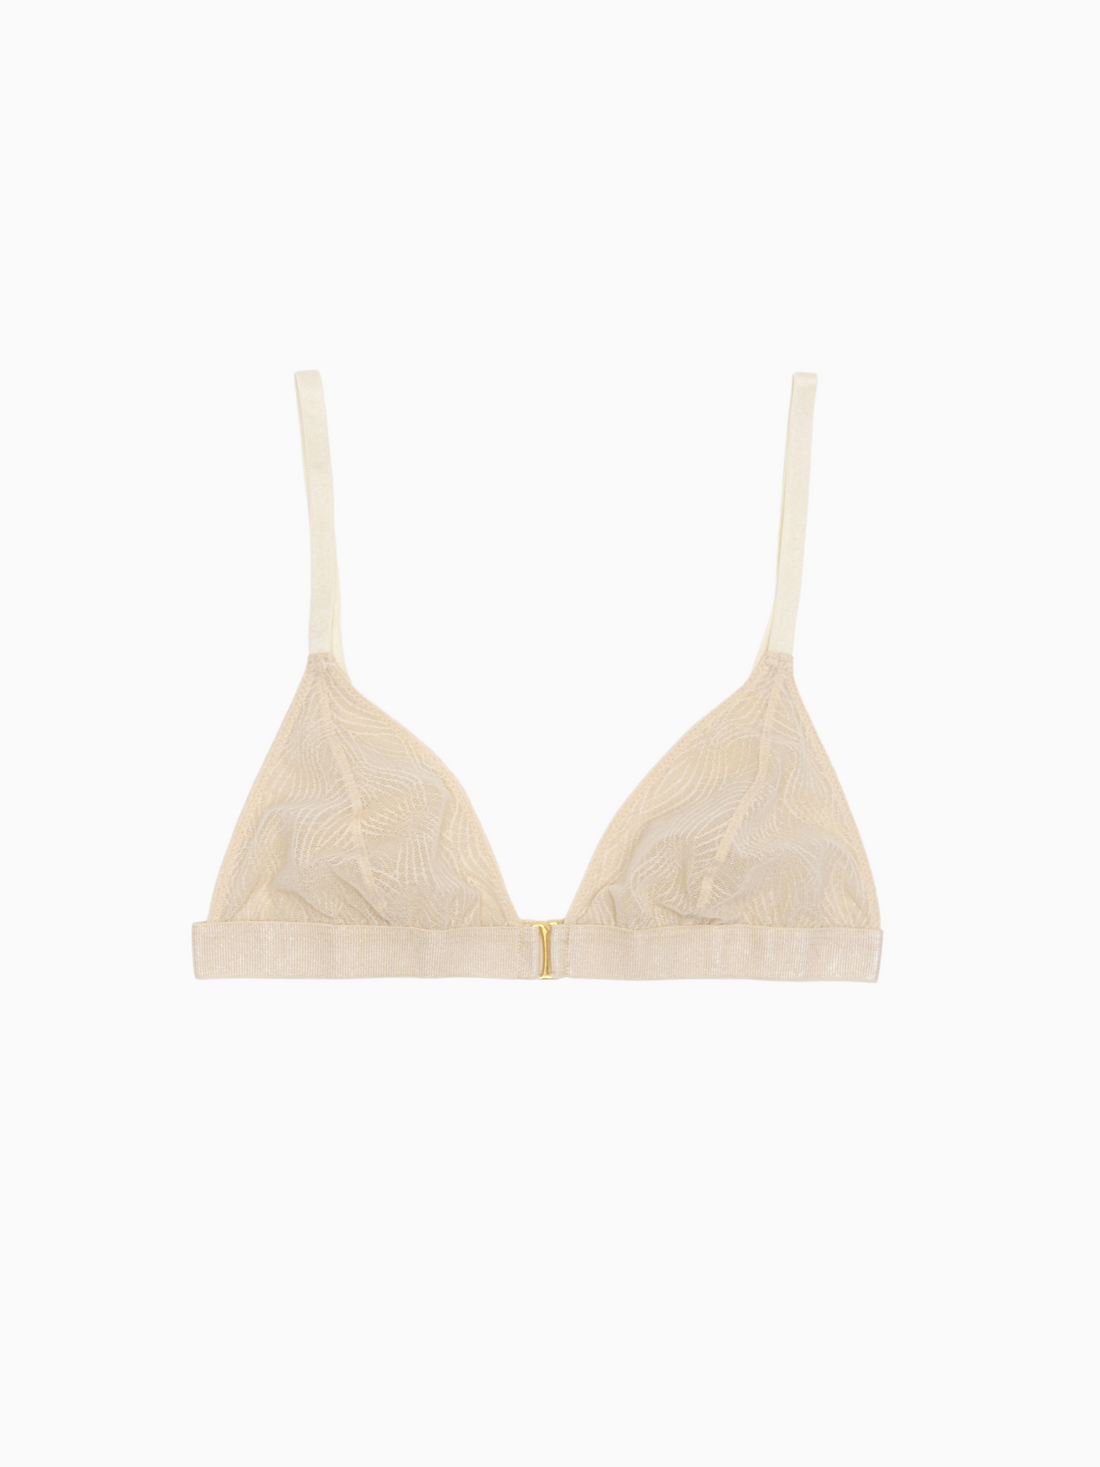 Semi/Romantic -  I have large breasts, is a triangle bra for me? We get  this question often. The short answer is : YES. Take our esme bra for  example- With a